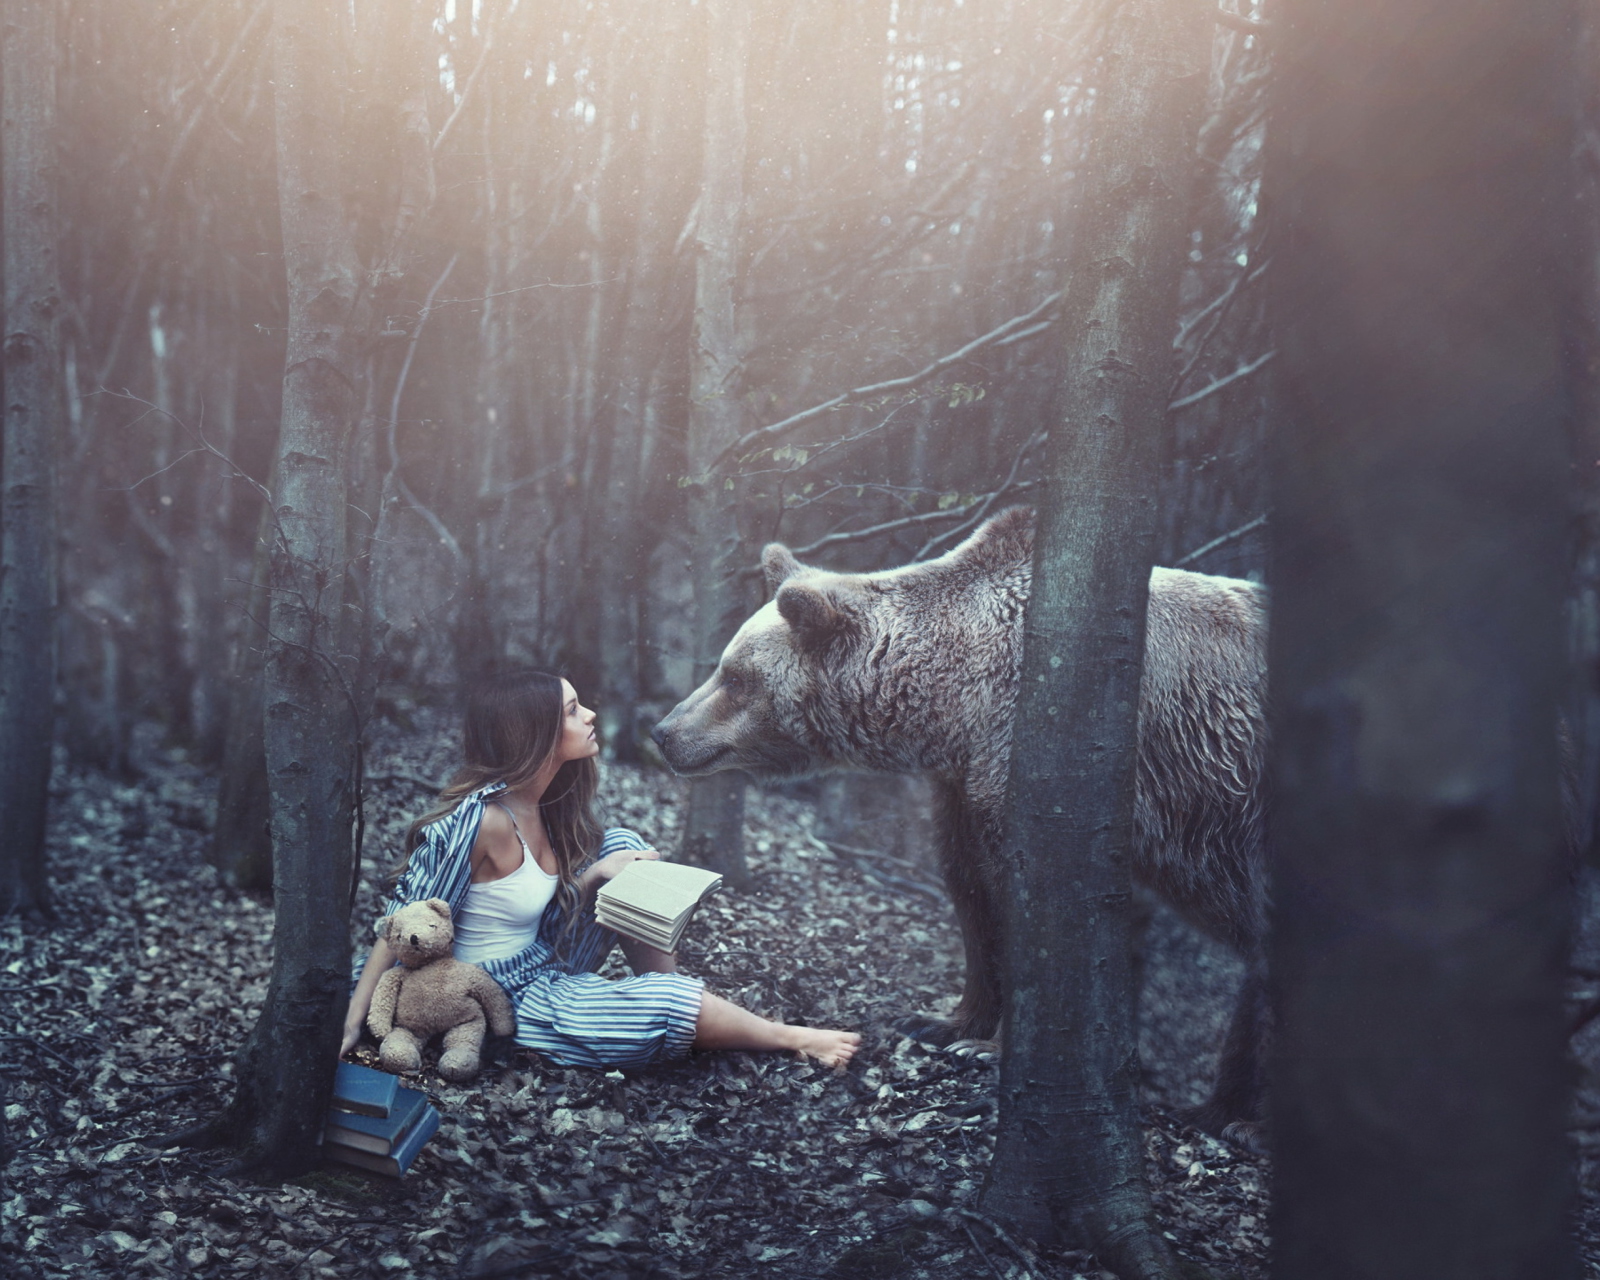 Girl And Two Bears In Forest By Rosie Hardy Photographer wallpaper 1600x1280